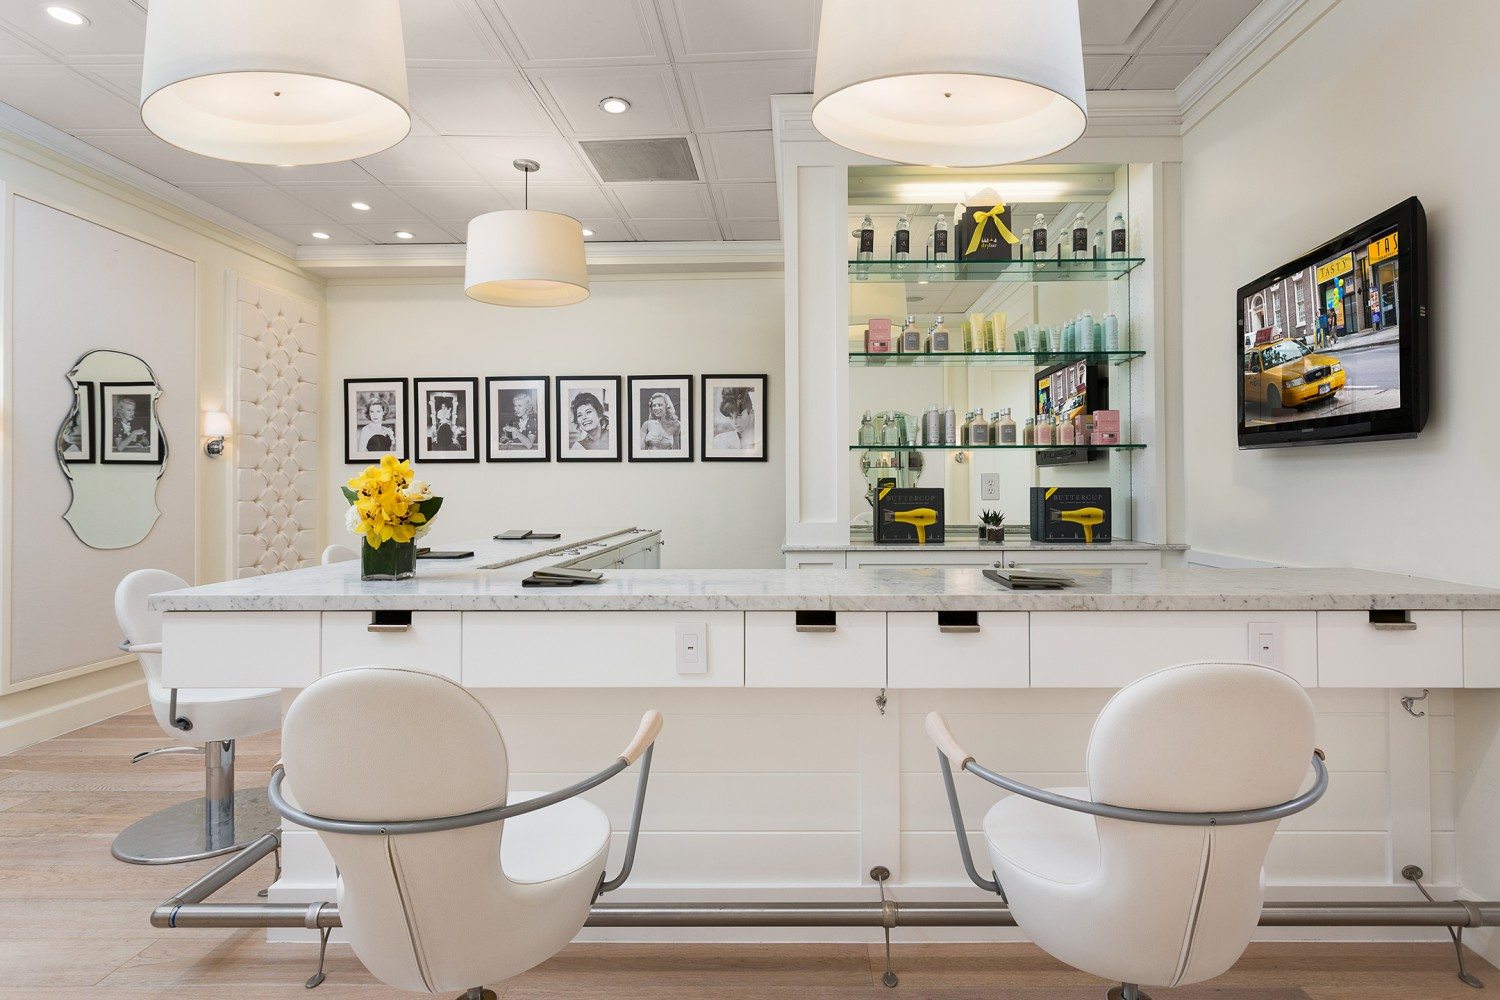 Drybar To Open Its First Private Location